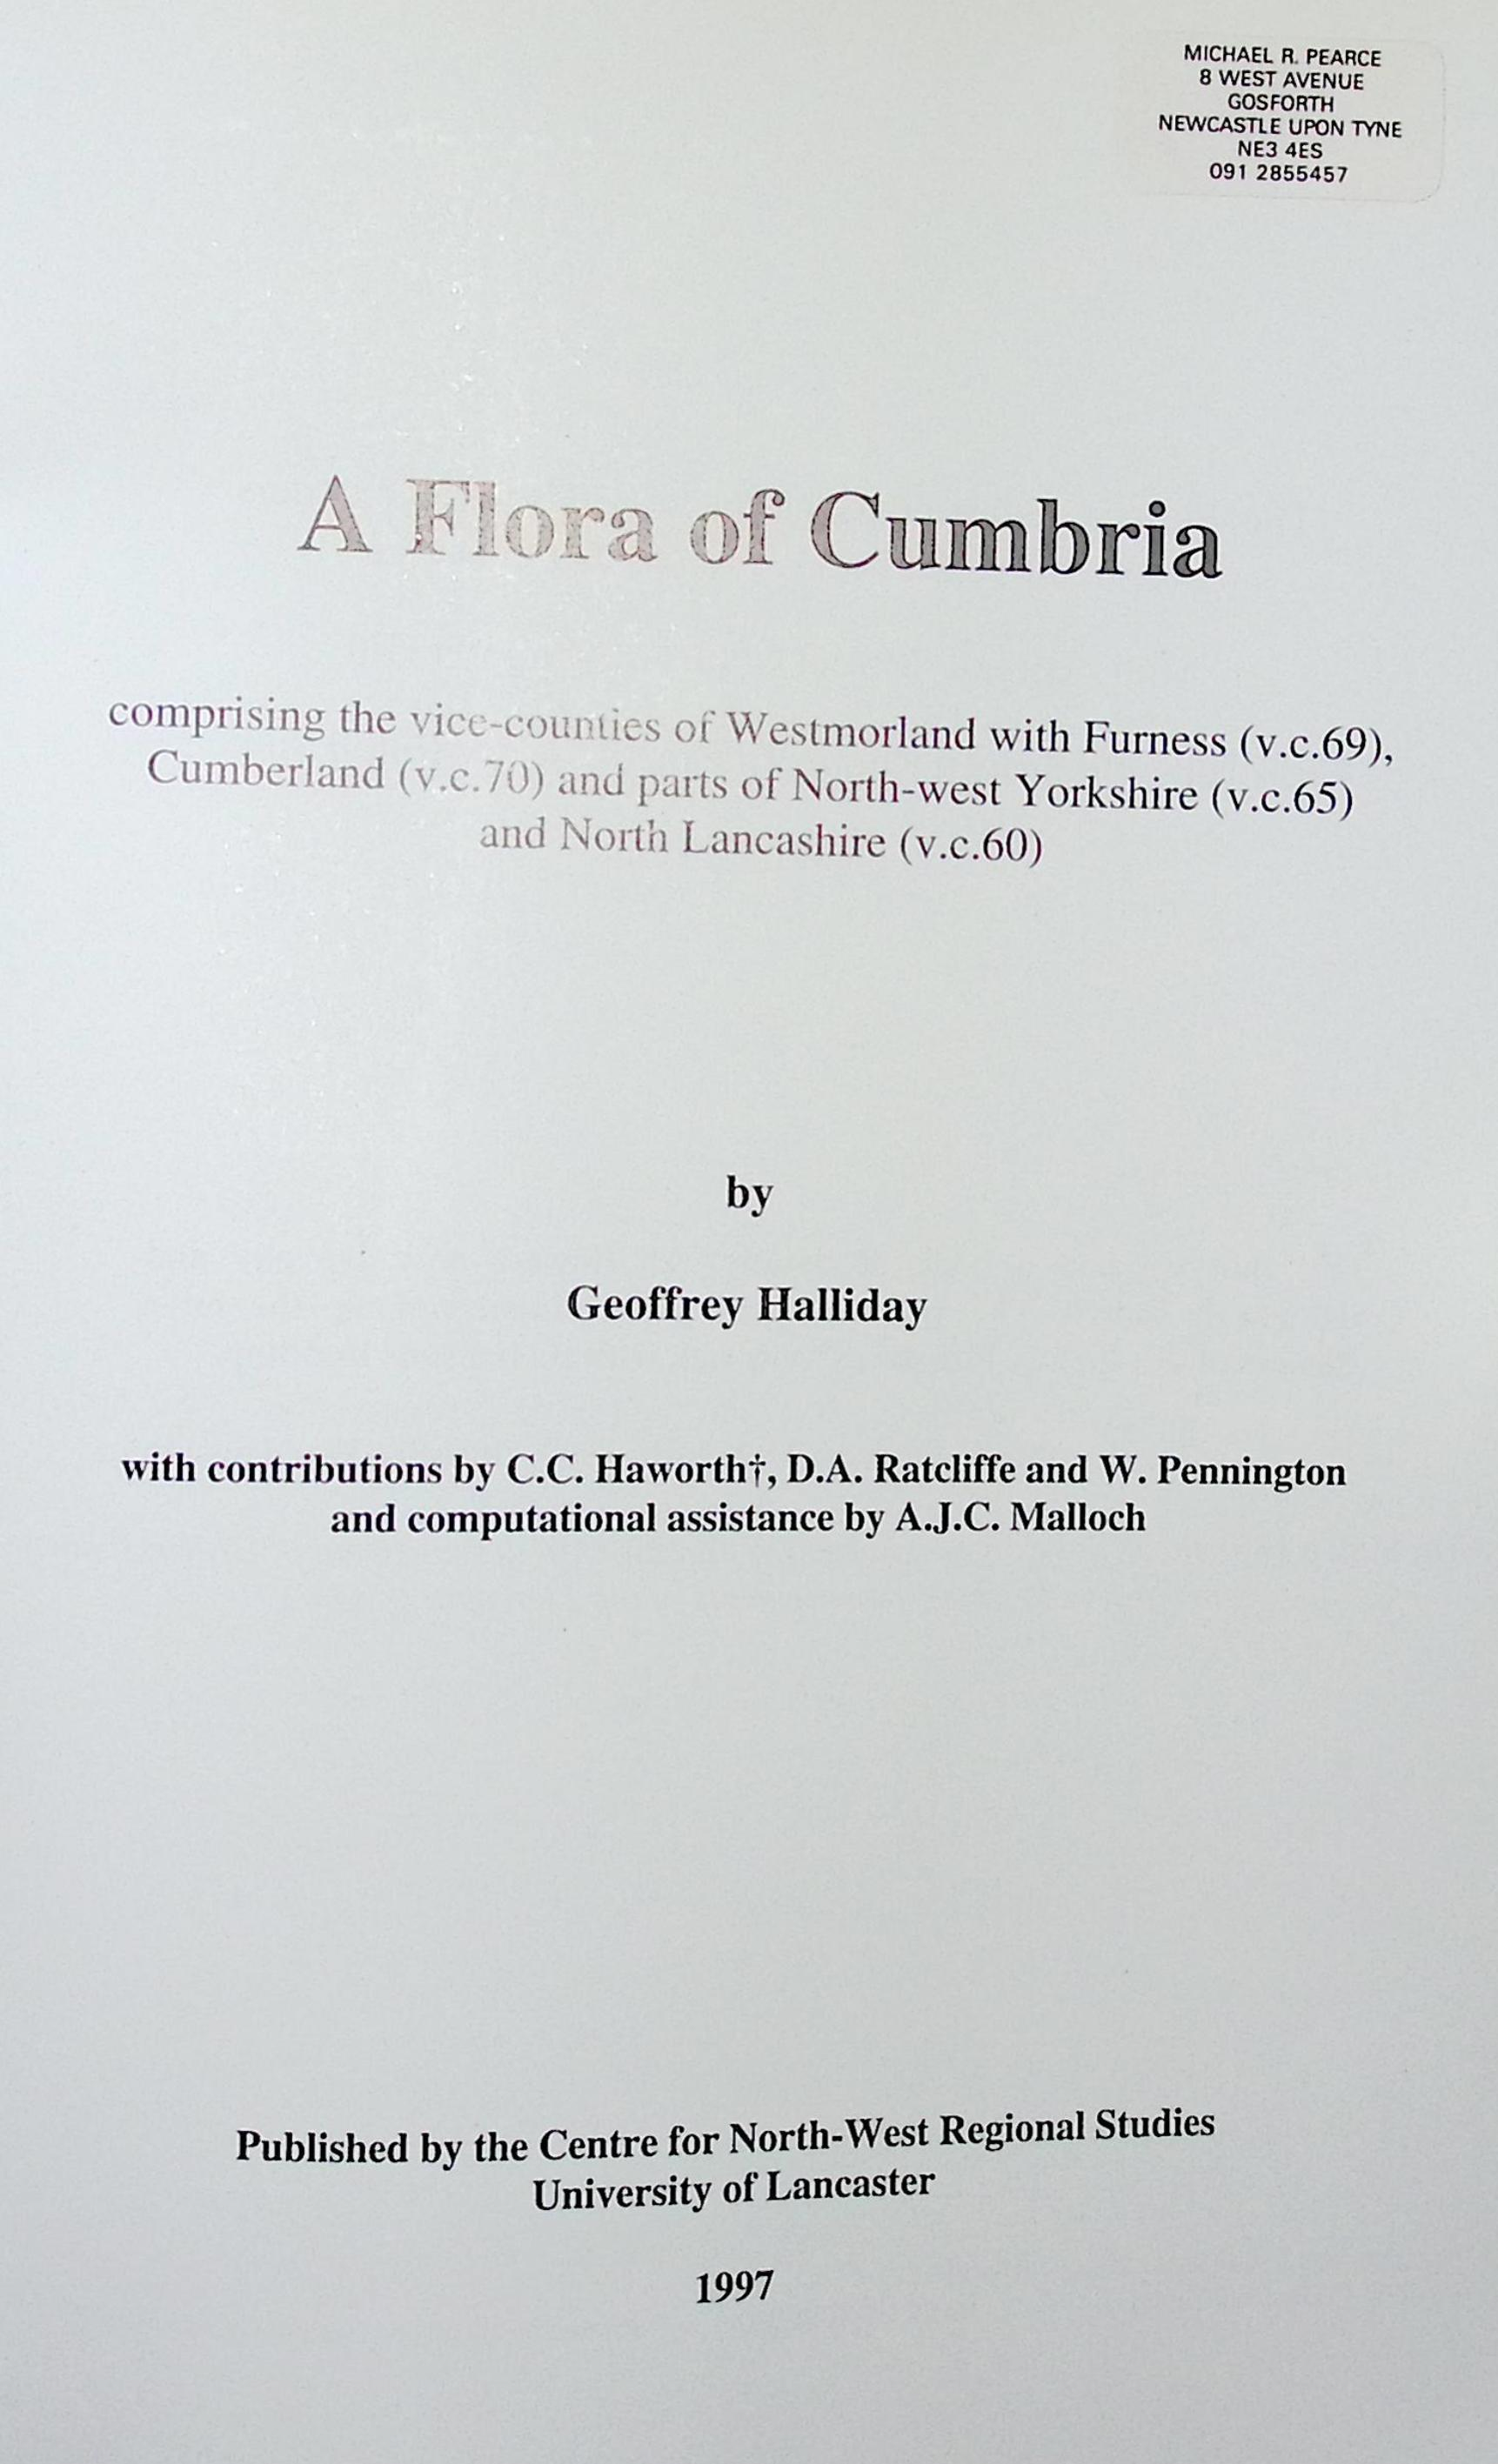 A Flora of Cumbria, Comprising the Vice-Counties of Westmorland with Furness, Cumberland and Parts of North-West Yorkshire and North Lancashire.